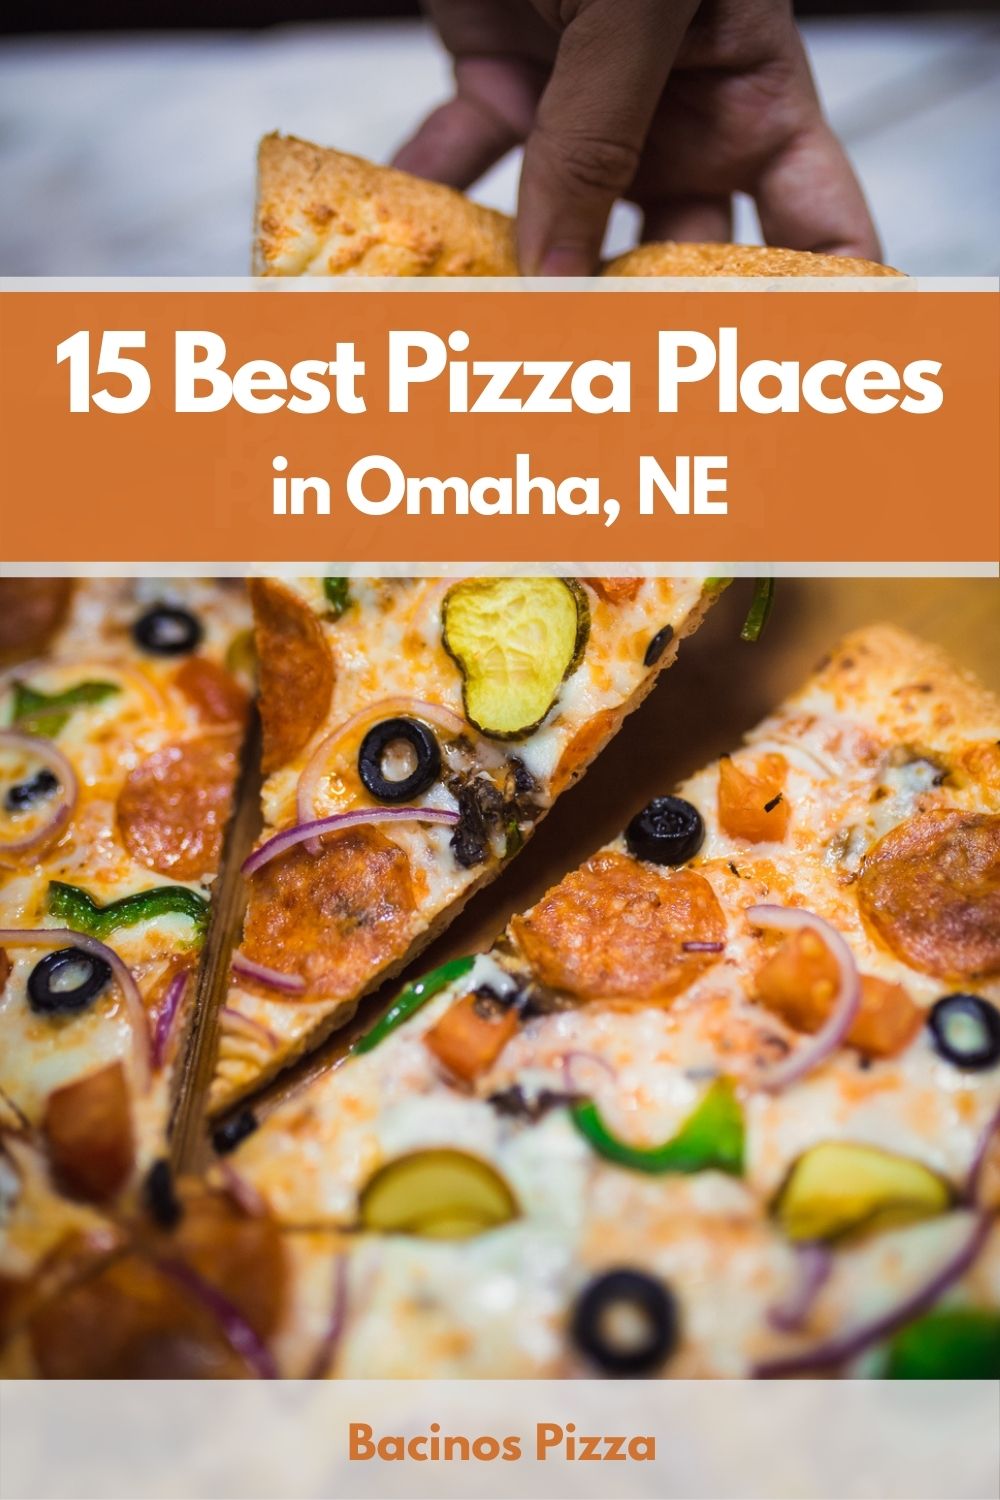 15 Best Pizza Places in Omaha, NE pin 2